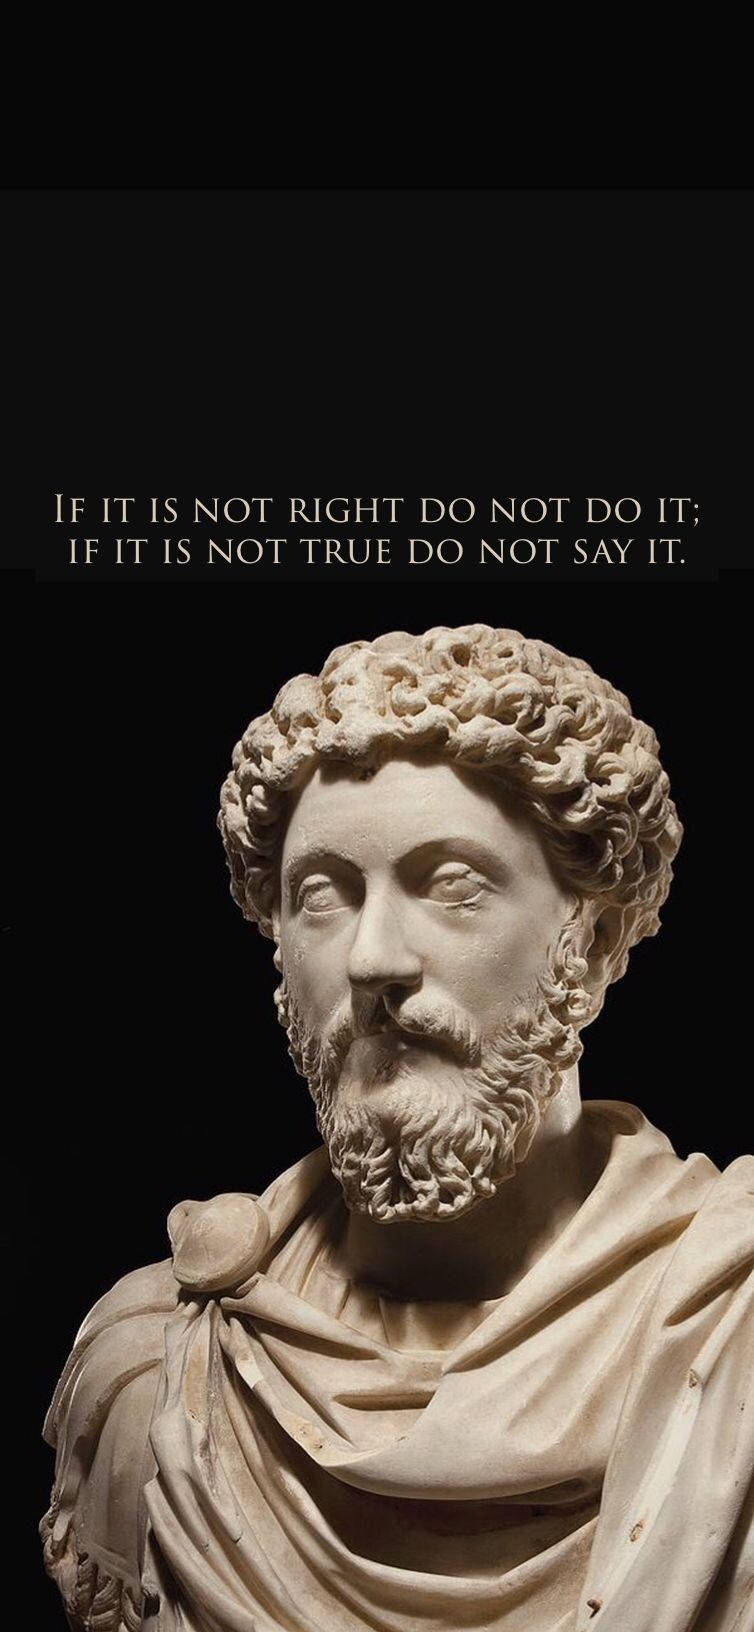 If It Is Not Right Stoicism Quote Wallpaper